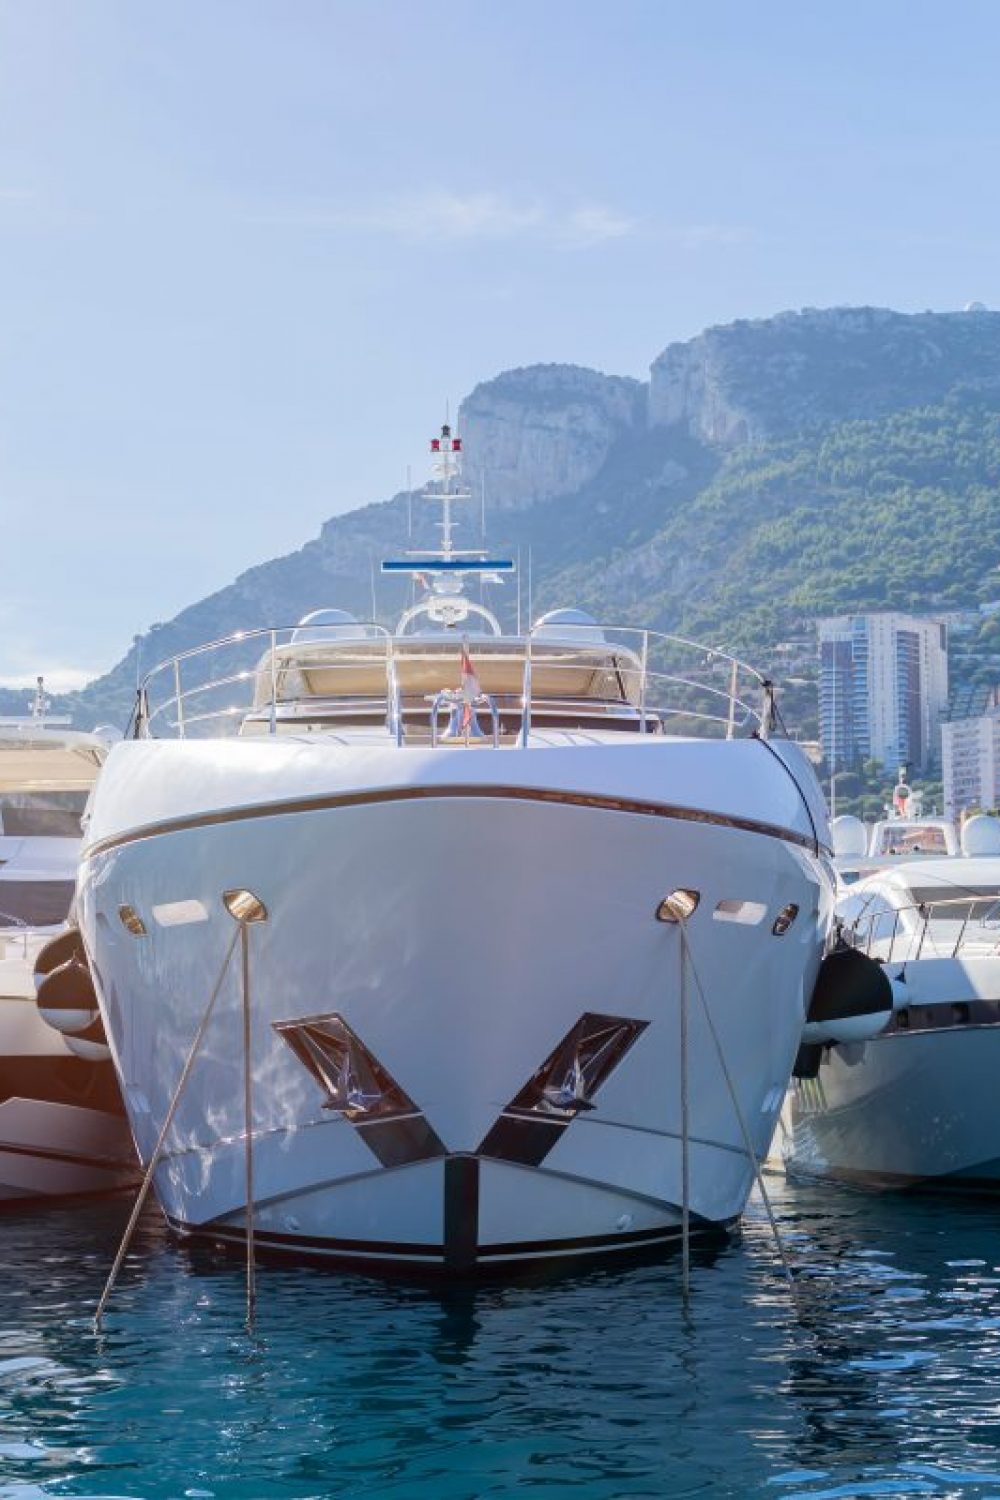 Three,Yachts,Moored,In,Monaco,Harbour,With,Monaco,Landscape,On